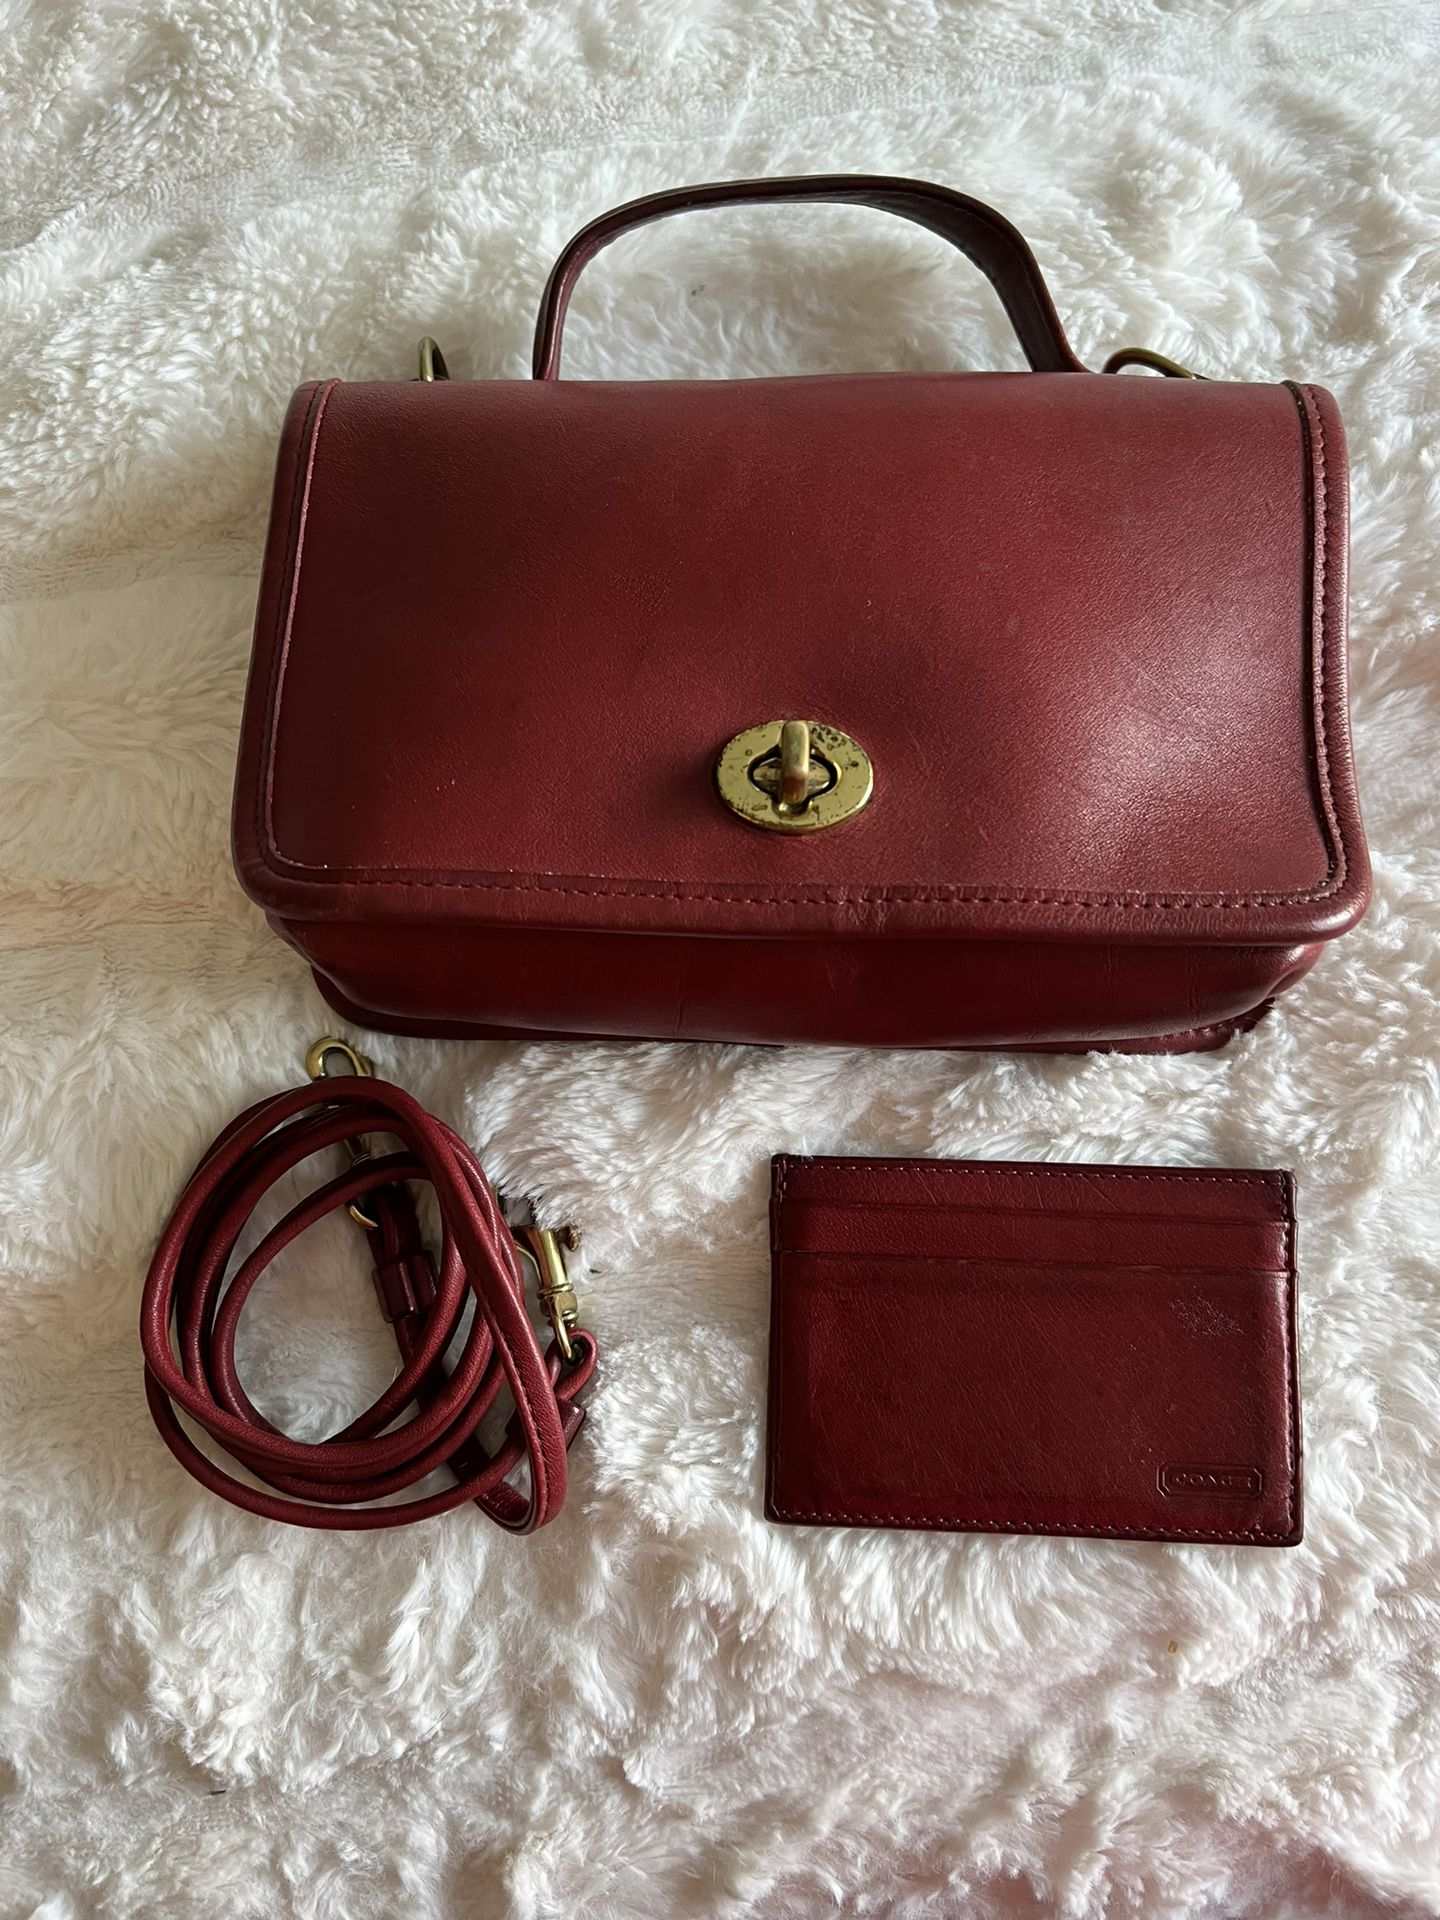 Coach Red Leather Casino Bag 9924 & Card Holder